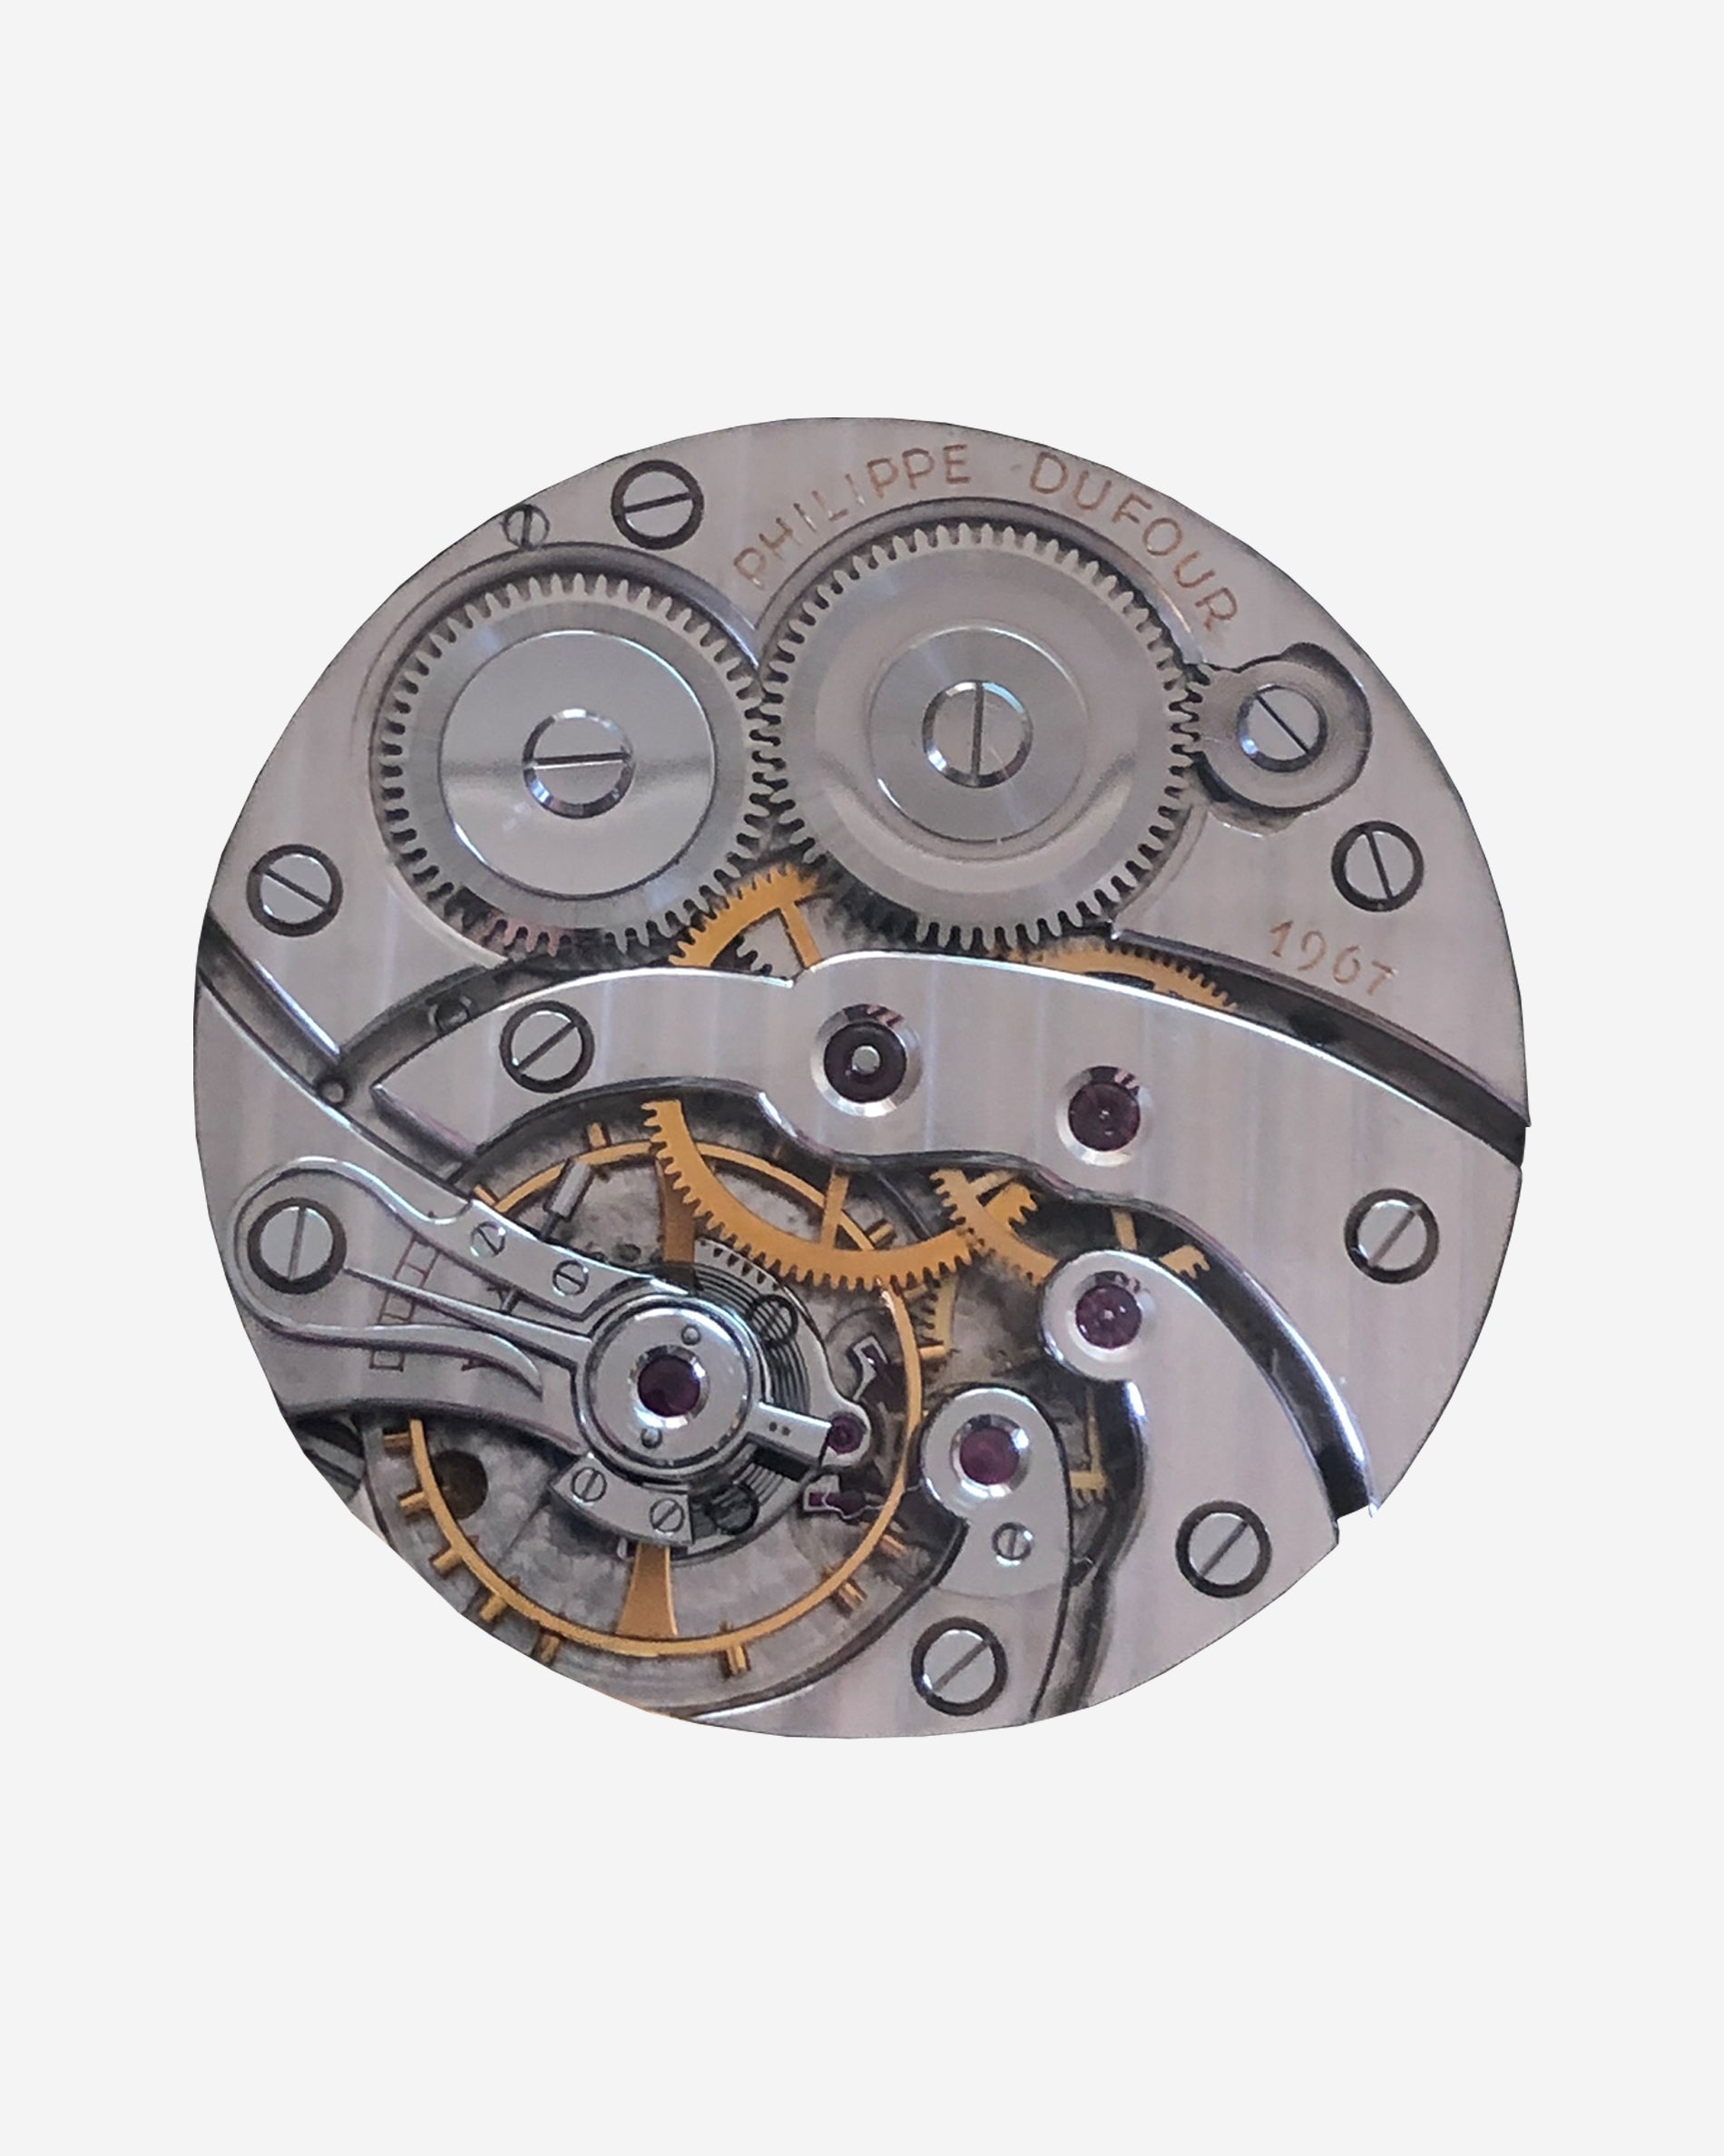 Philippe Dufour school watch movement from A Collected Man London